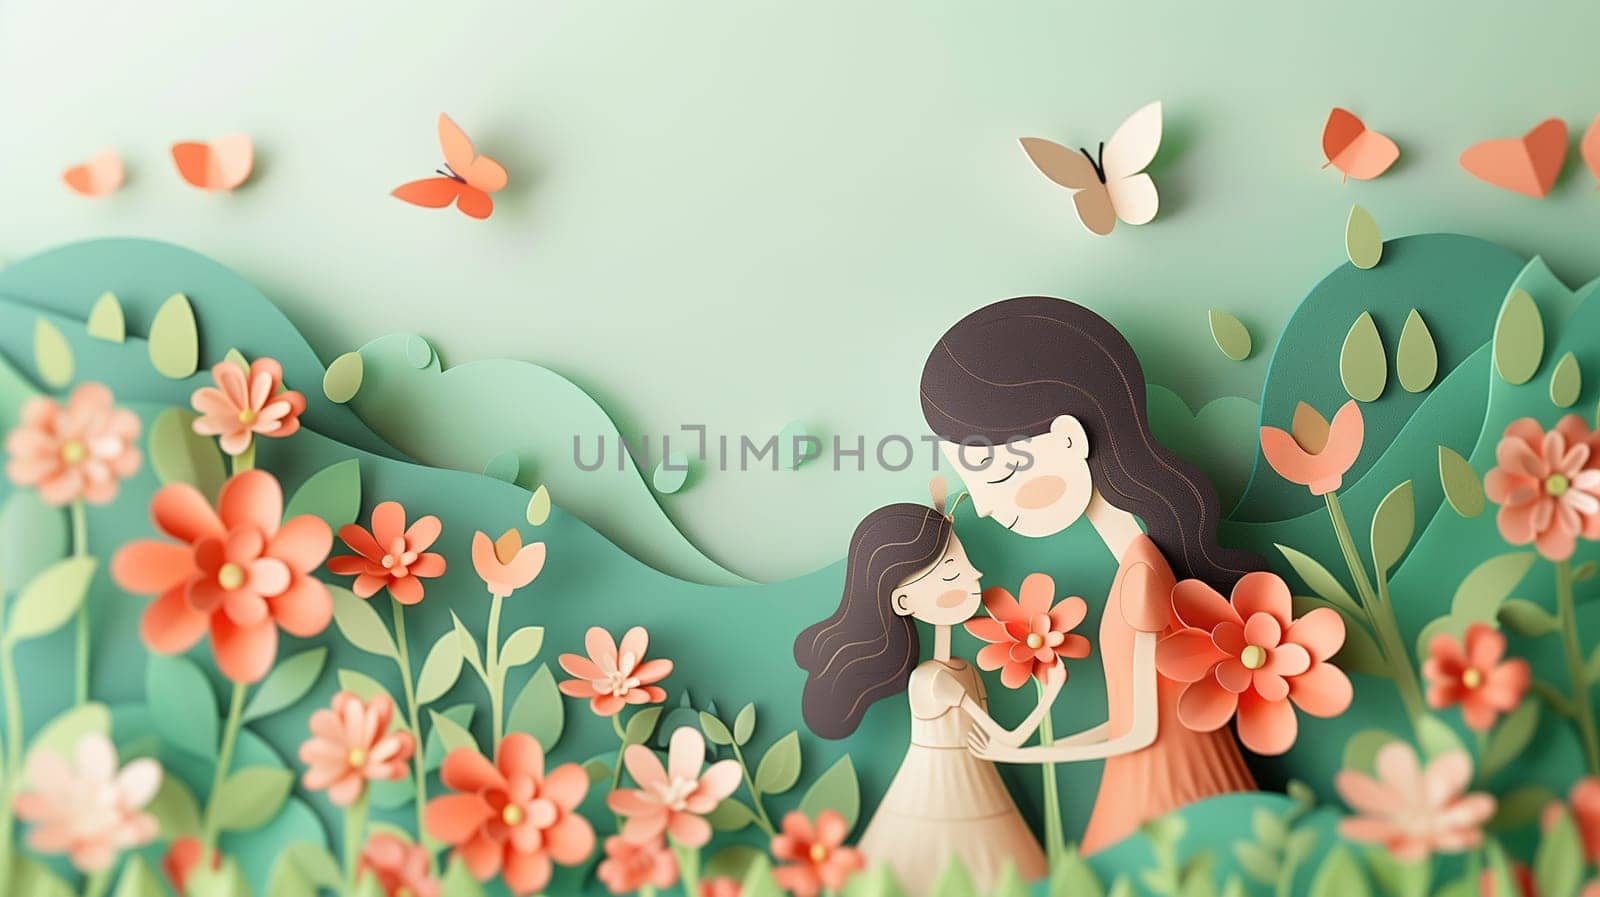 A woman tenderly holds a child in a vibrant field of colorful flowers, surrounded by natures beauty on a sunny day. The child looks up at the woman with a smile, creating a heartwarming scene.